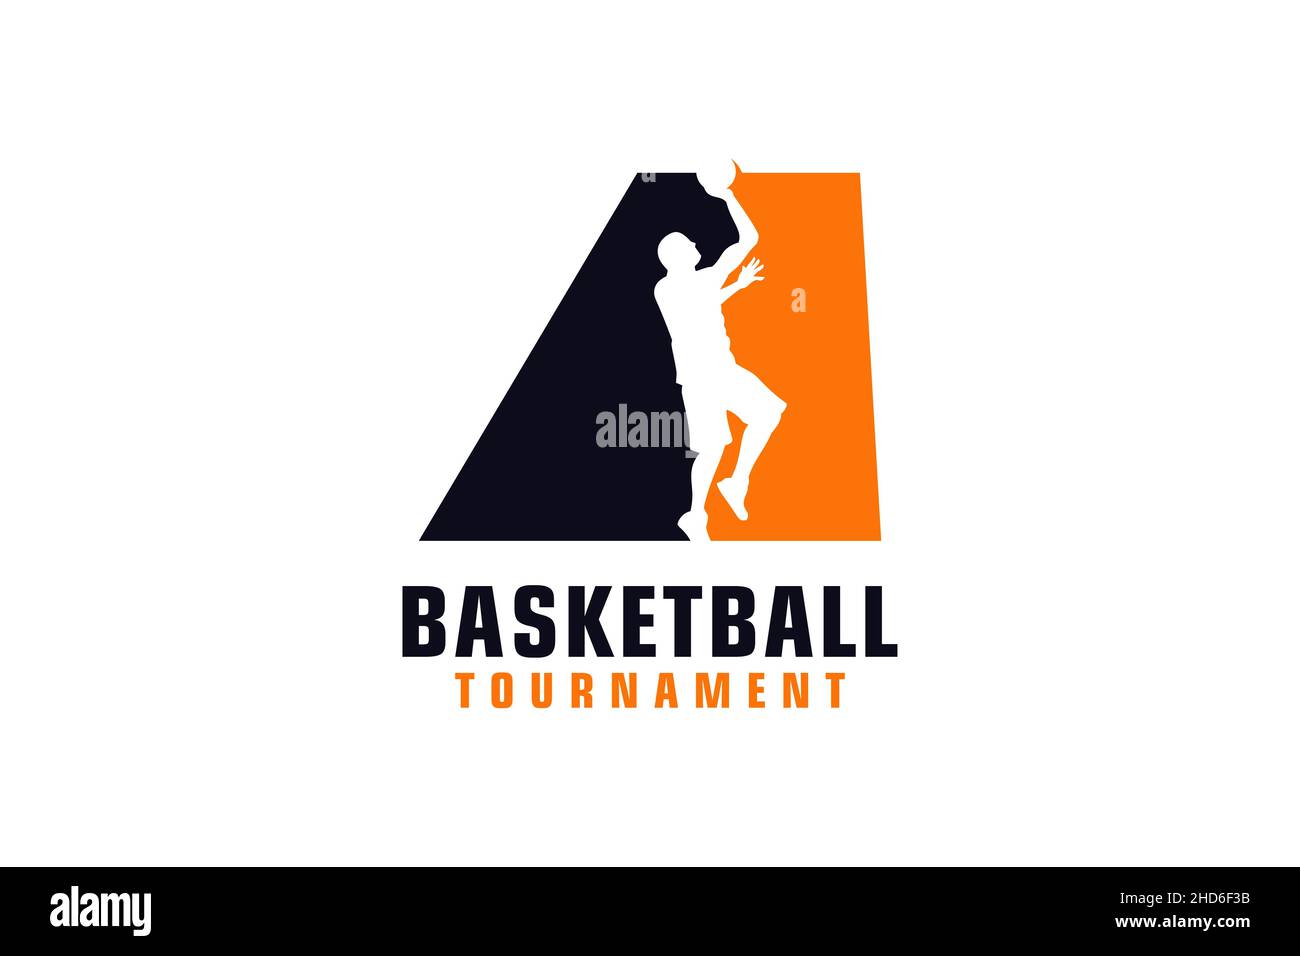 Player Man With Ball Design, Basketball Sport Hobby Competition Game  Training Equipment Tournement And Play Theme Vector Illustration Royalty  Free SVG, Cliparts, Vectors, and Stock Illustration. Image 150945490.